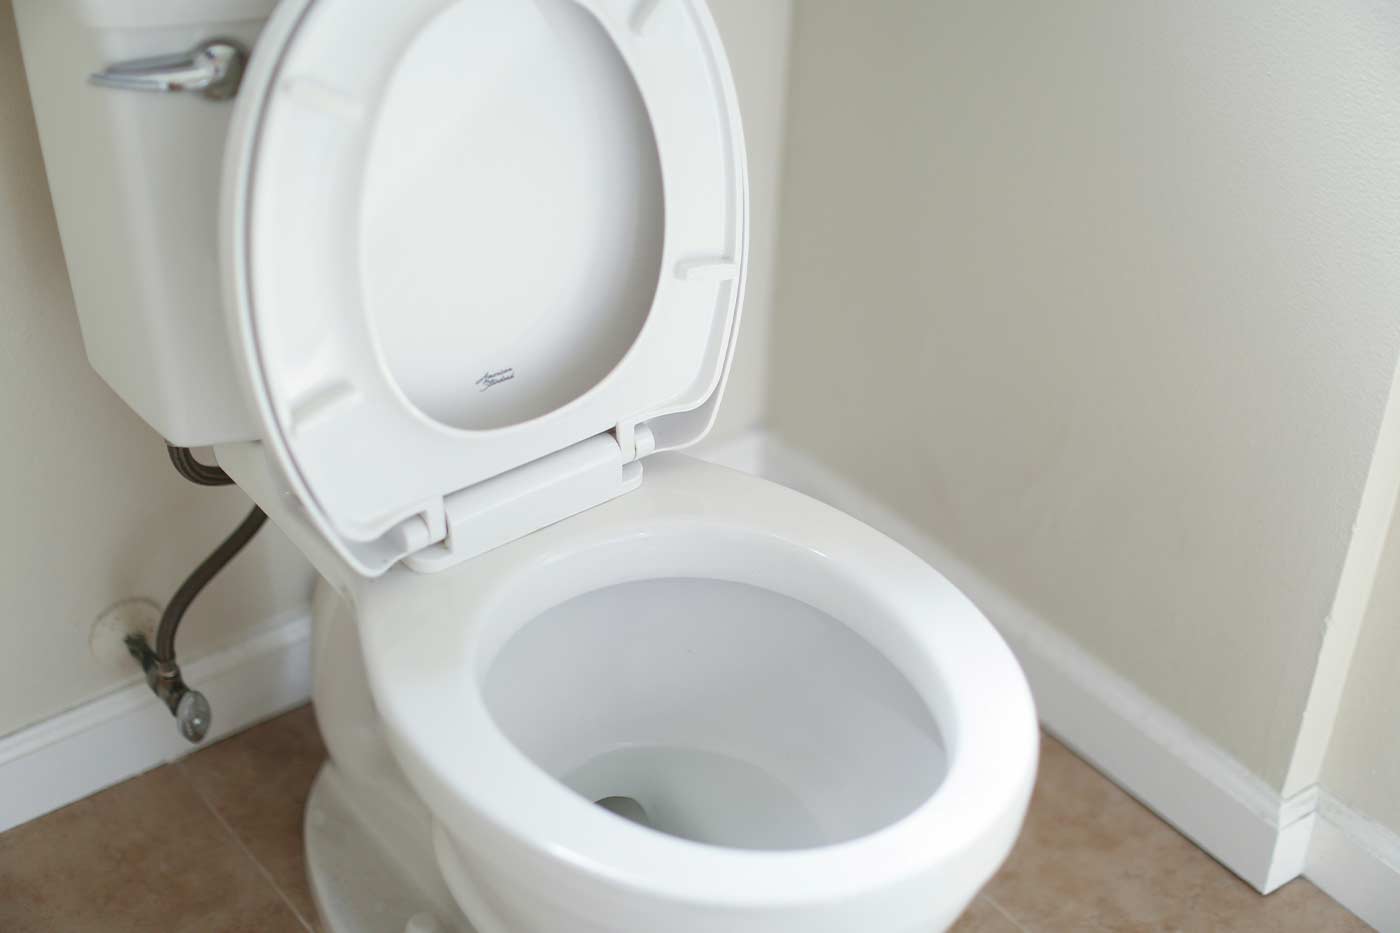 what causes brown stains in toilet bowl?